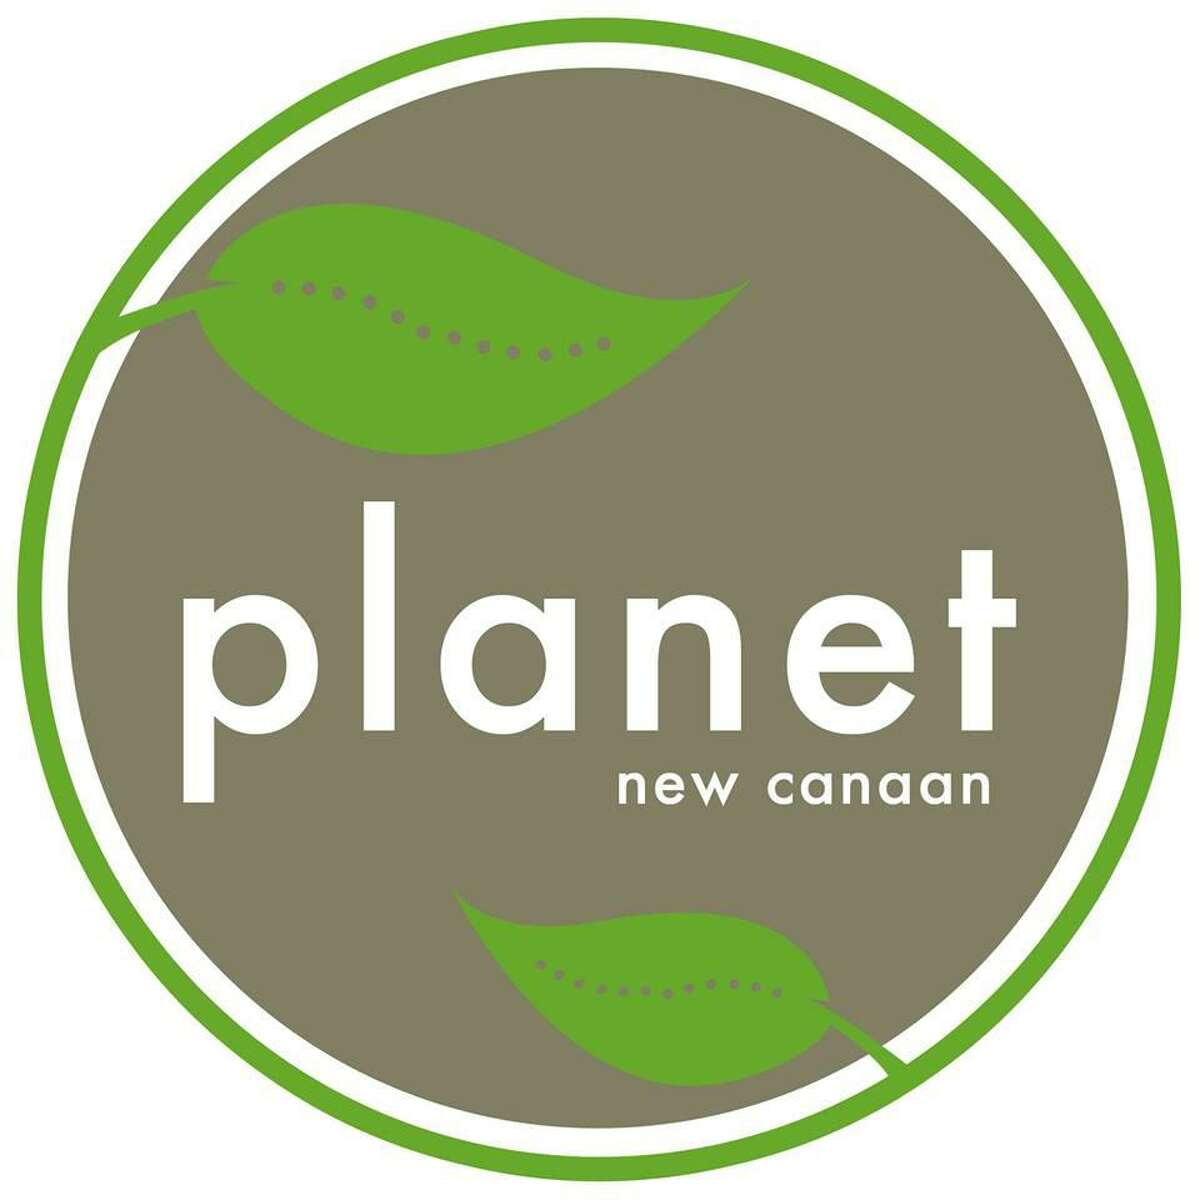 Planet New Canaan logo from their Facebook page.